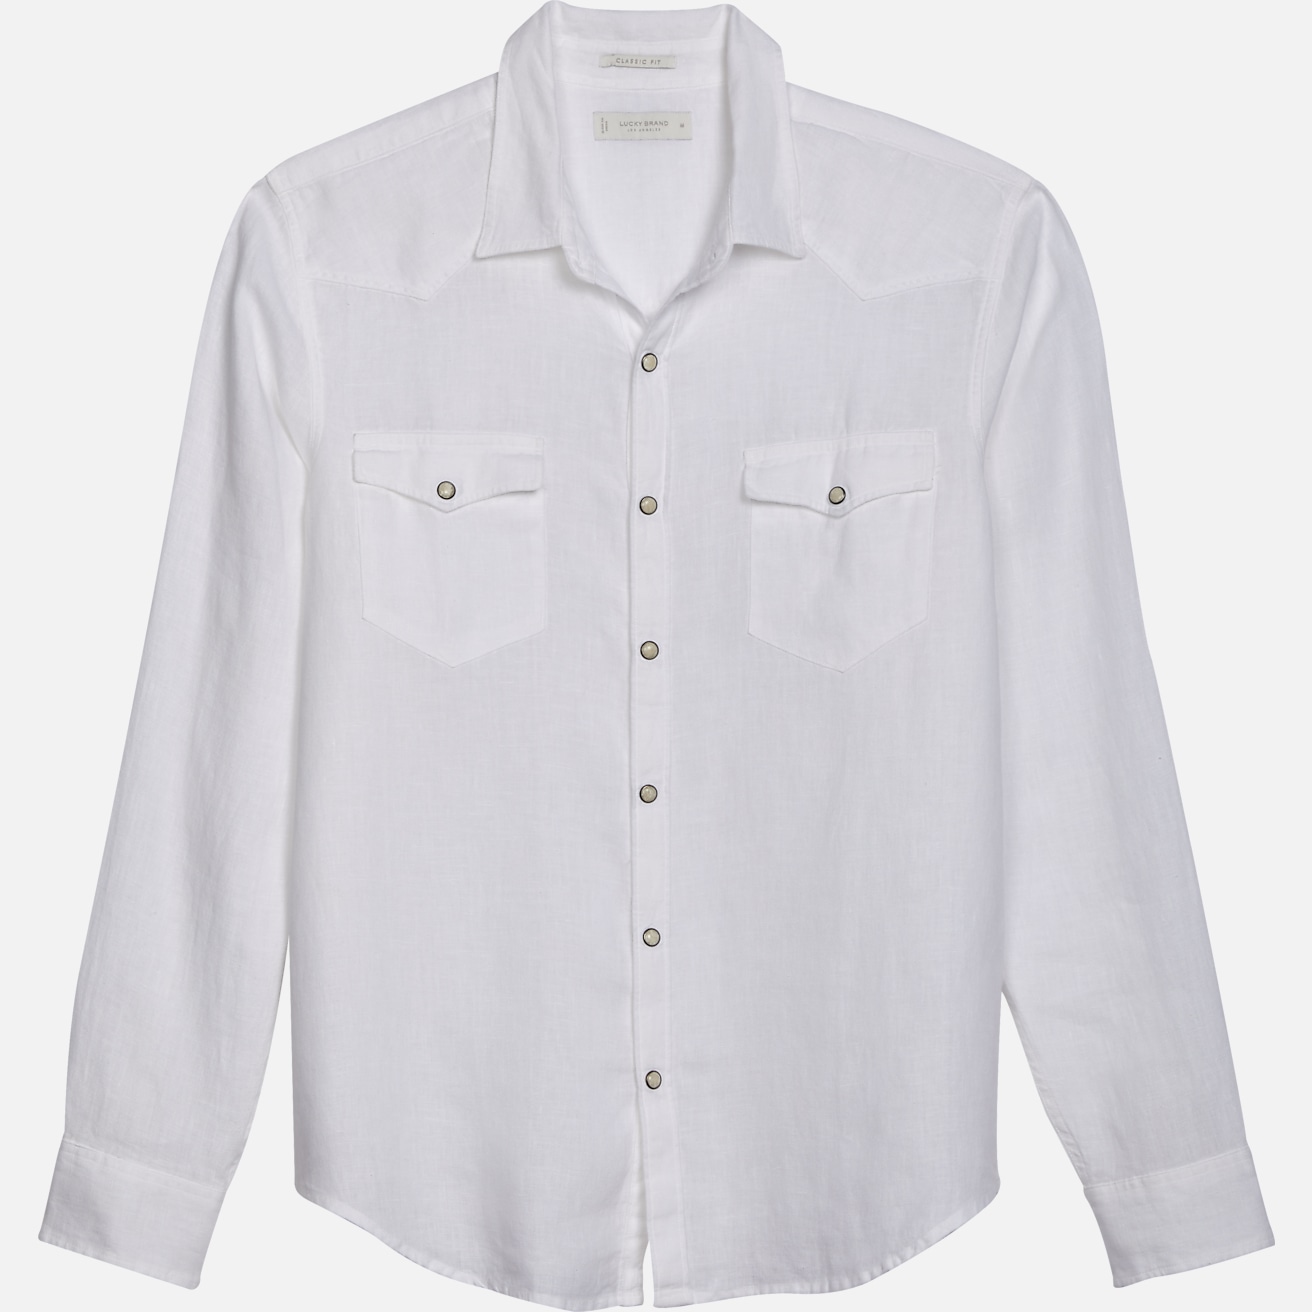 https://image.menswearhouse.com/is/image/TMW/TMW_6NJK_10_LUCKY_BRAND_SPORT_SHIRTS_WHITE_MAIN?imPolicy=pdp-mob-2x